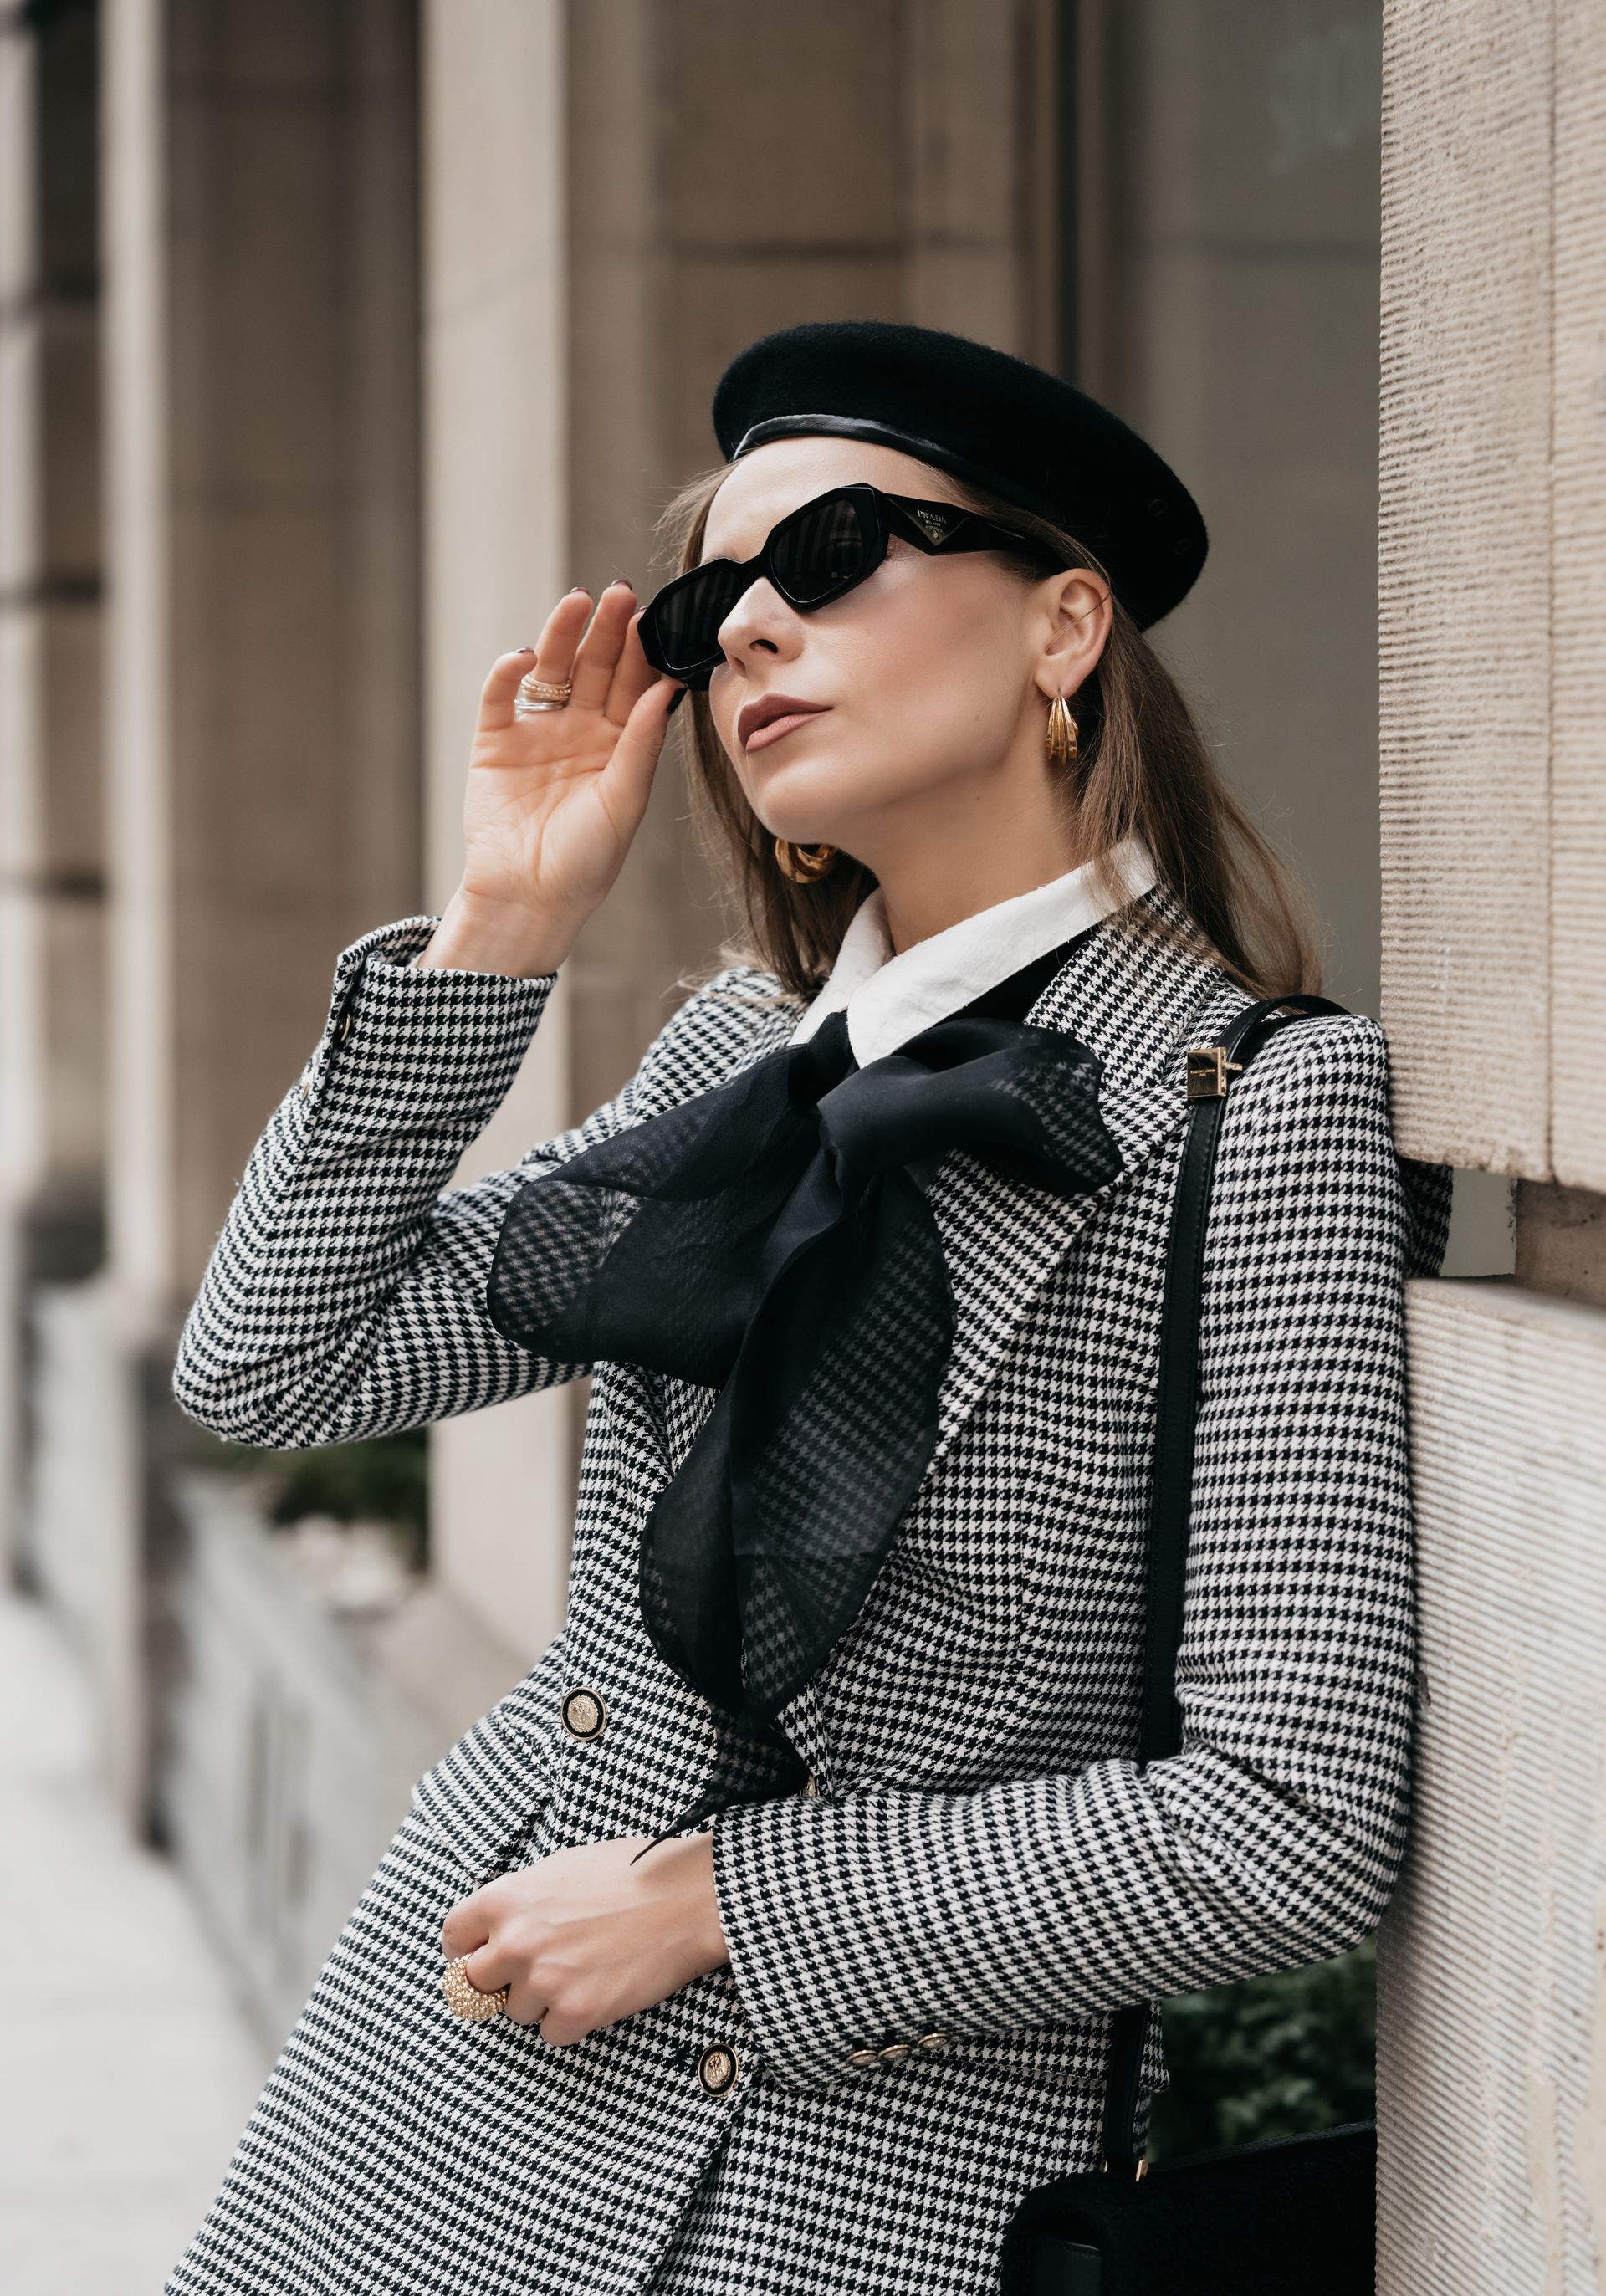 Woman in houndstooth coat, black beret, and ribbon, adjusting sunglasses against a brick backdrop for personal branding photos.